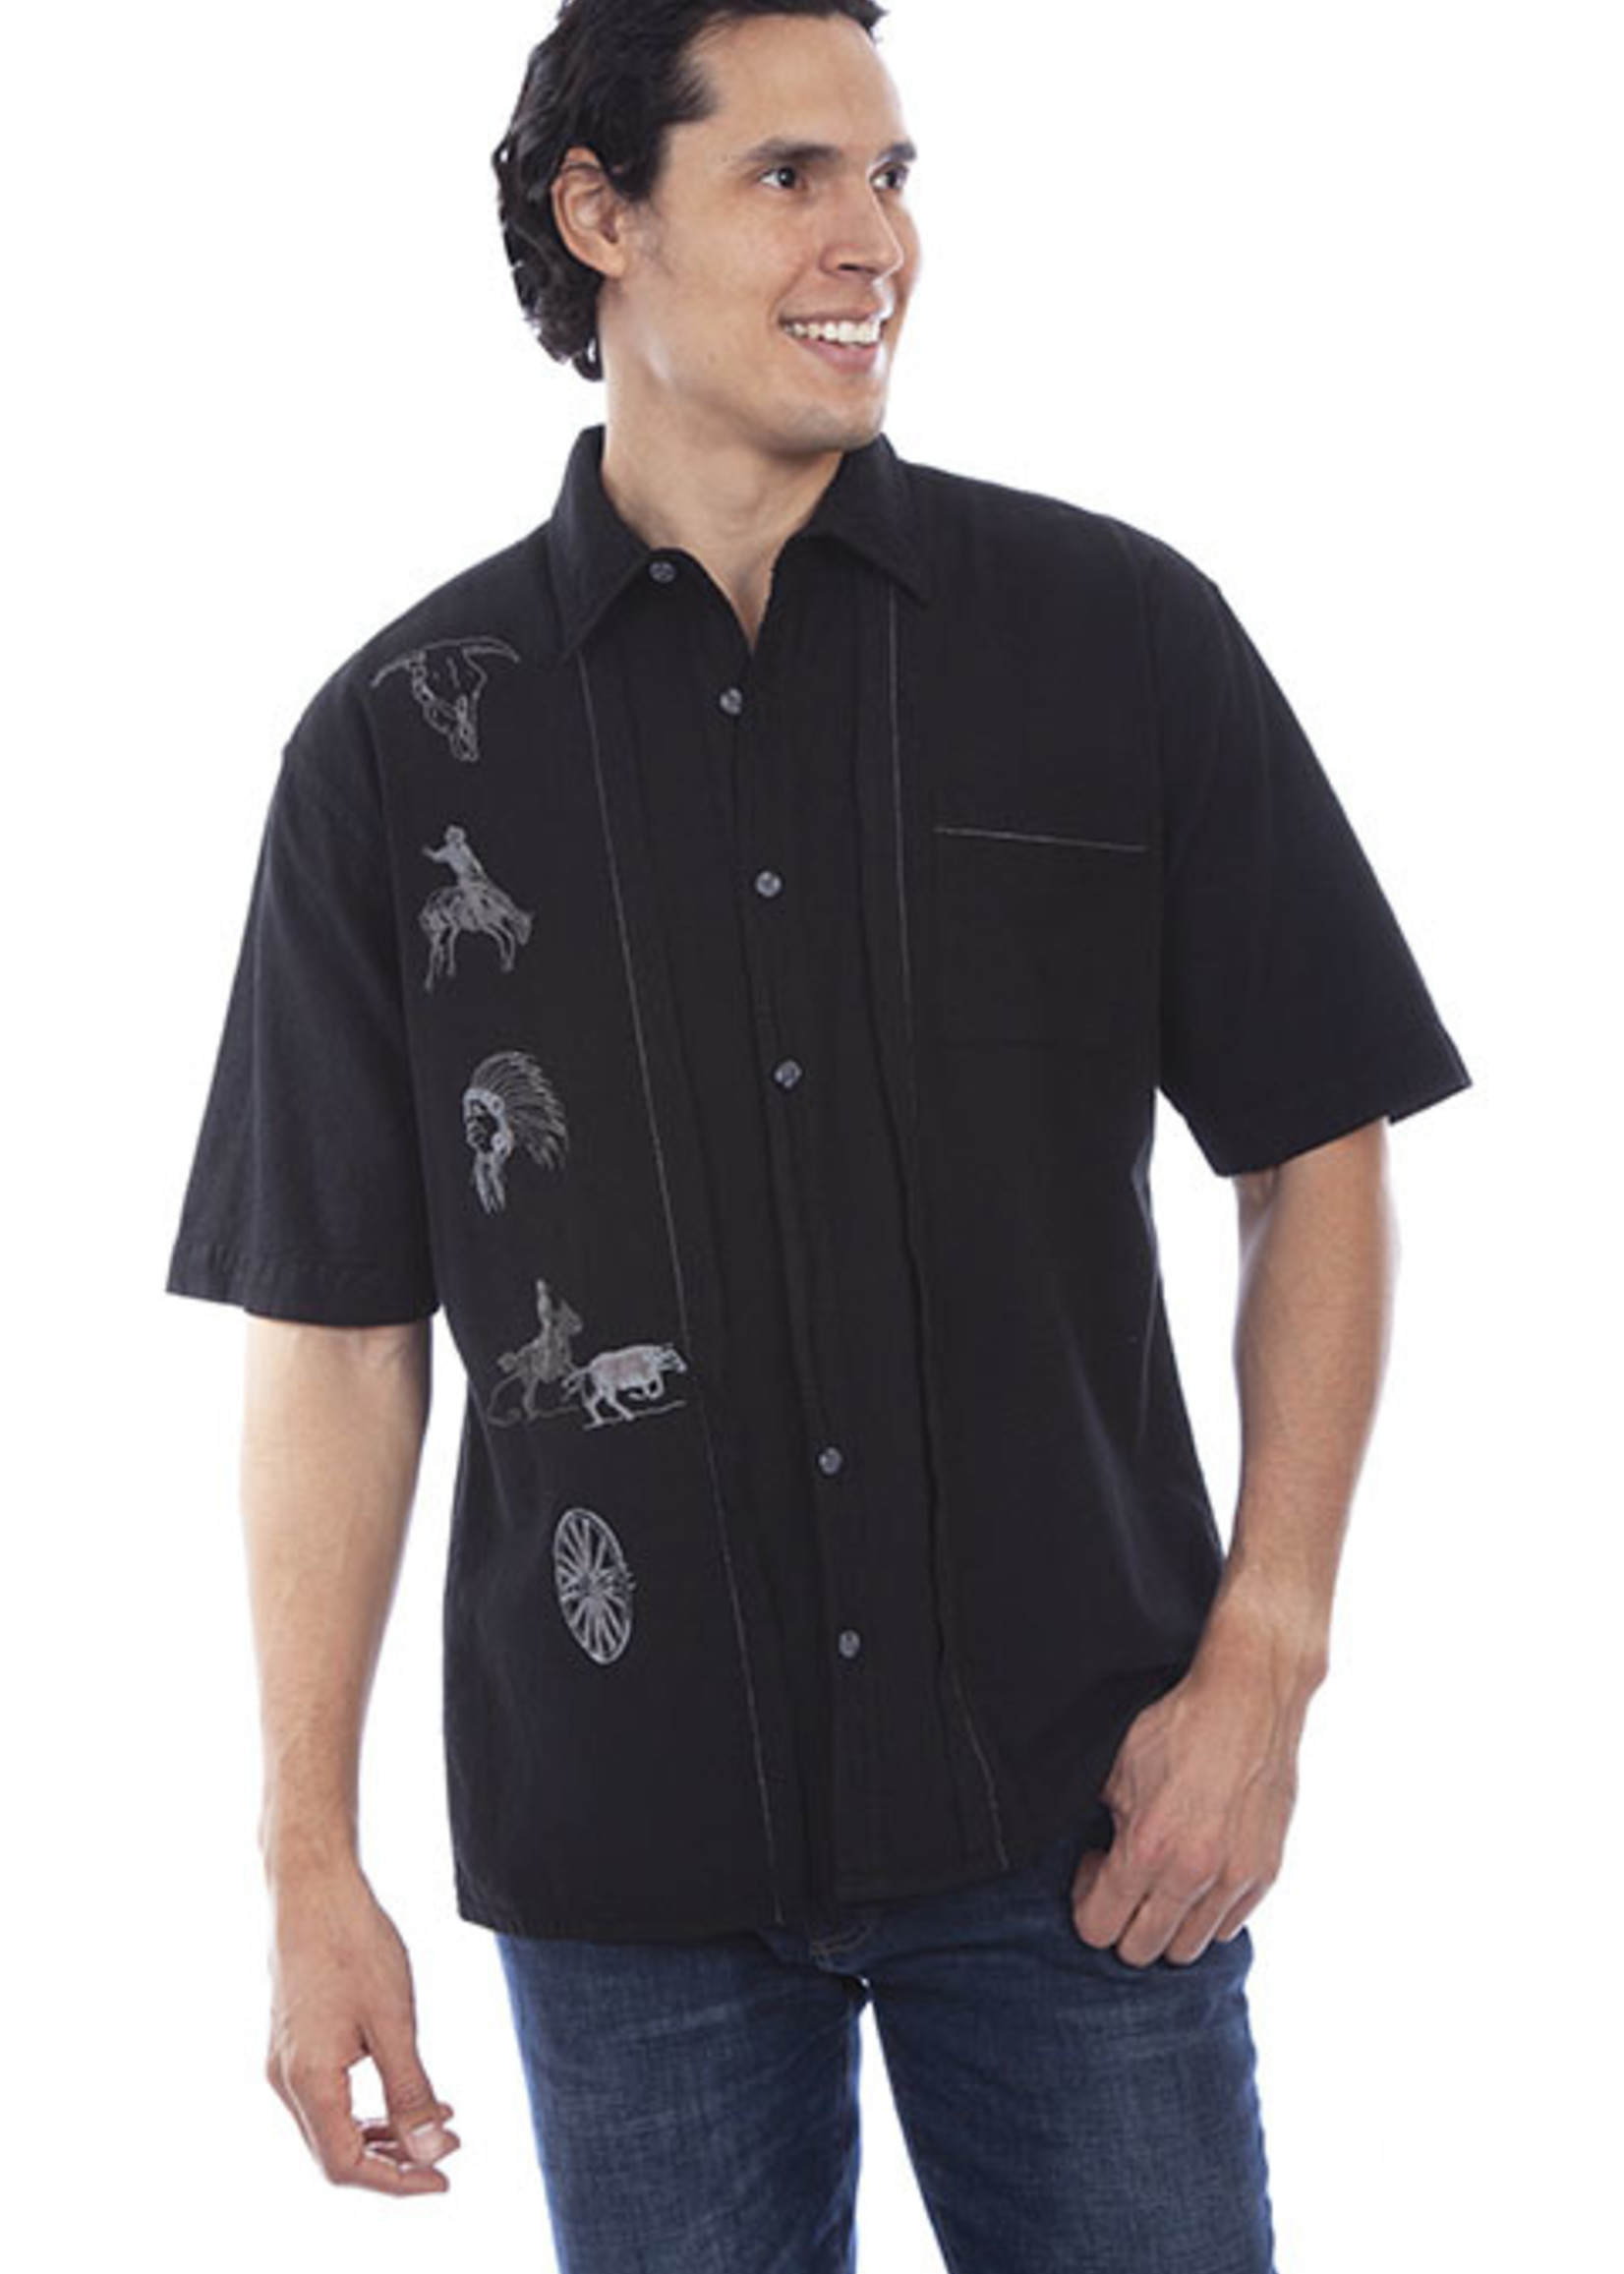 Scully Black s/s Embroidered shirt